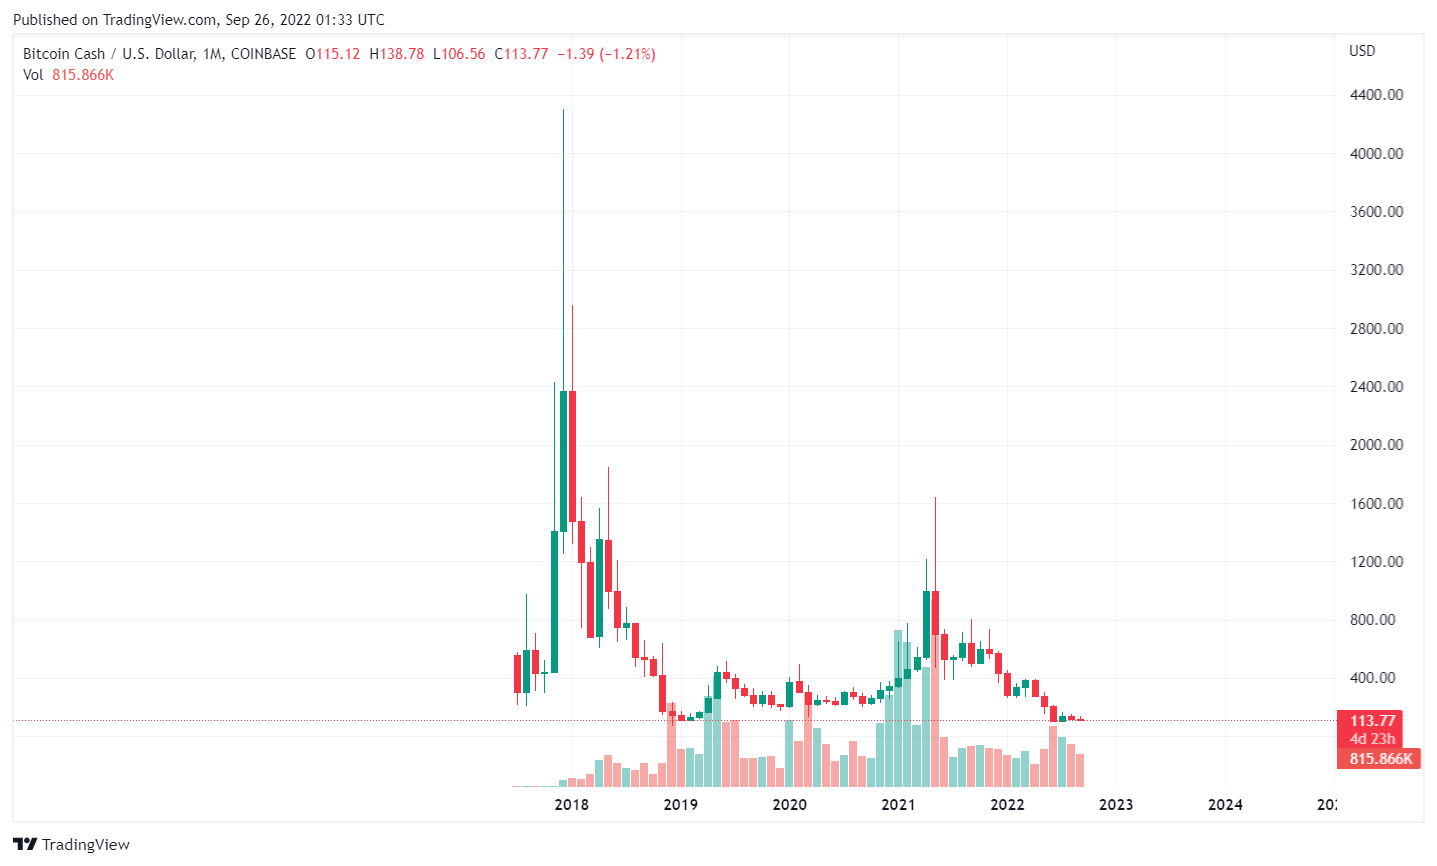 BCH / USD historical price chart as of September 26, 2022. Source: TradingView